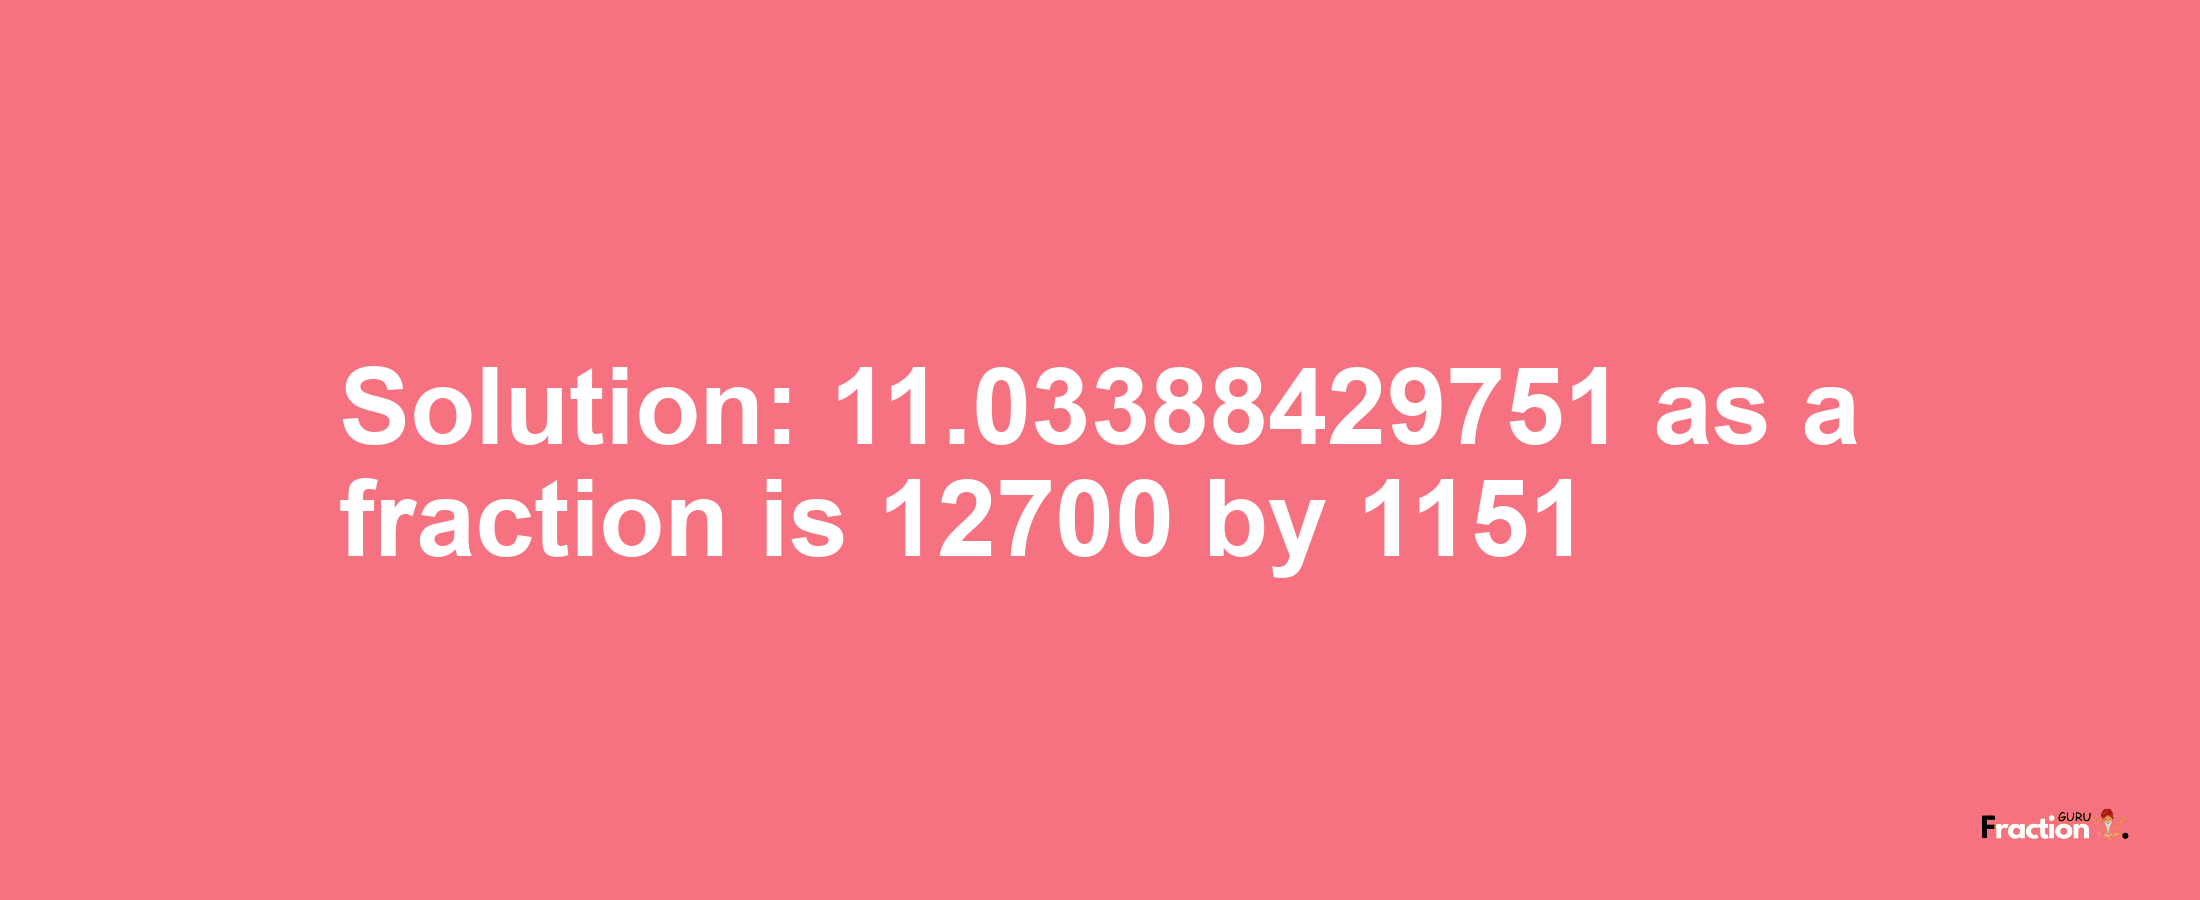 Solution:11.03388429751 as a fraction is 12700/1151